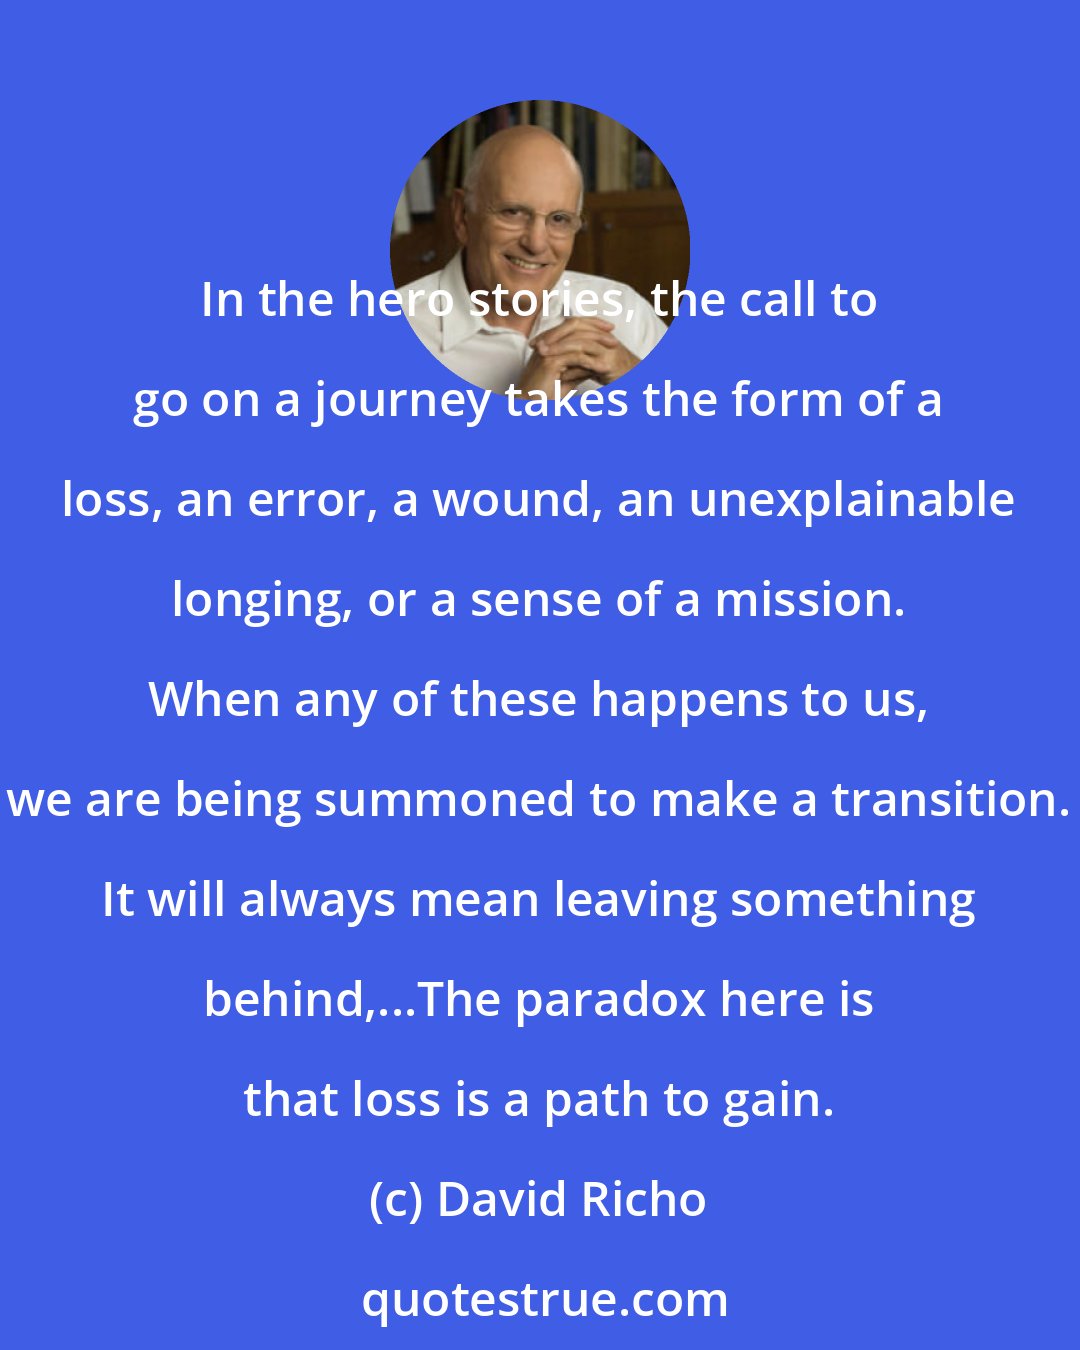 David Richo: In the hero stories, the call to go on a journey takes the form of a loss, an error, a wound, an unexplainable longing, or a sense of a mission. When any of these happens to us, we are being summoned to make a transition. It will always mean leaving something behind,...The paradox here is that loss is a path to gain.